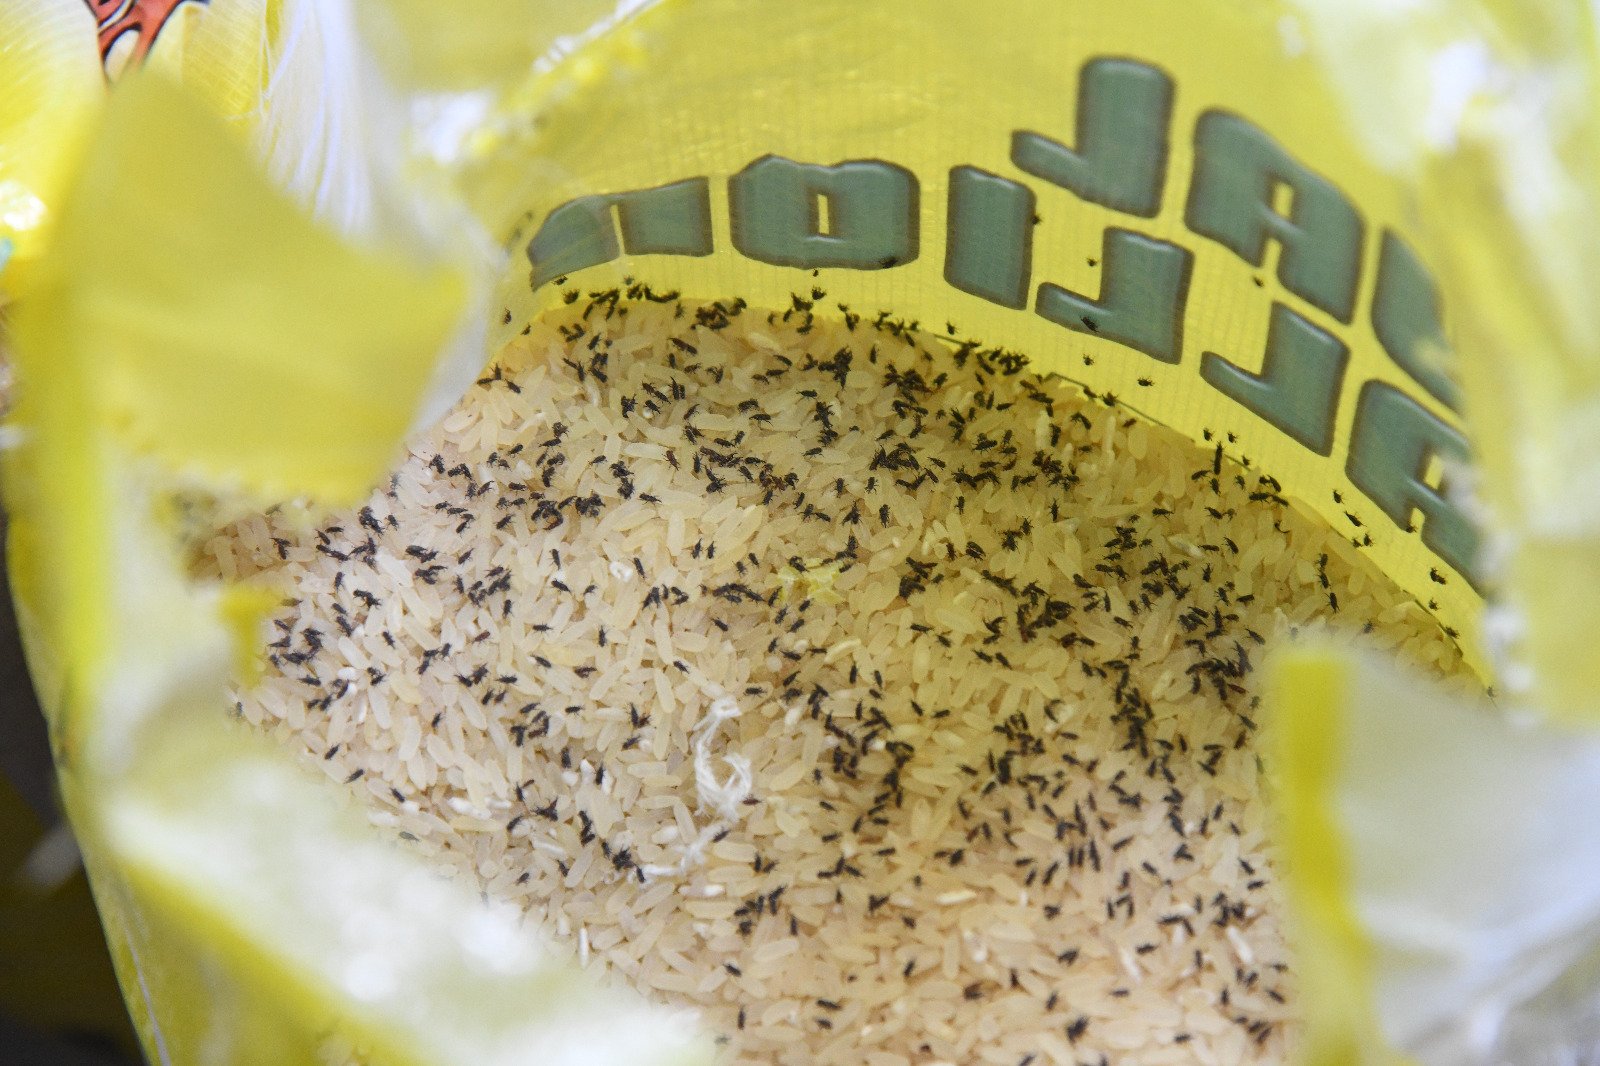 FCCPC seals up 4U supermarket over price discrepancies, weevil infested rice